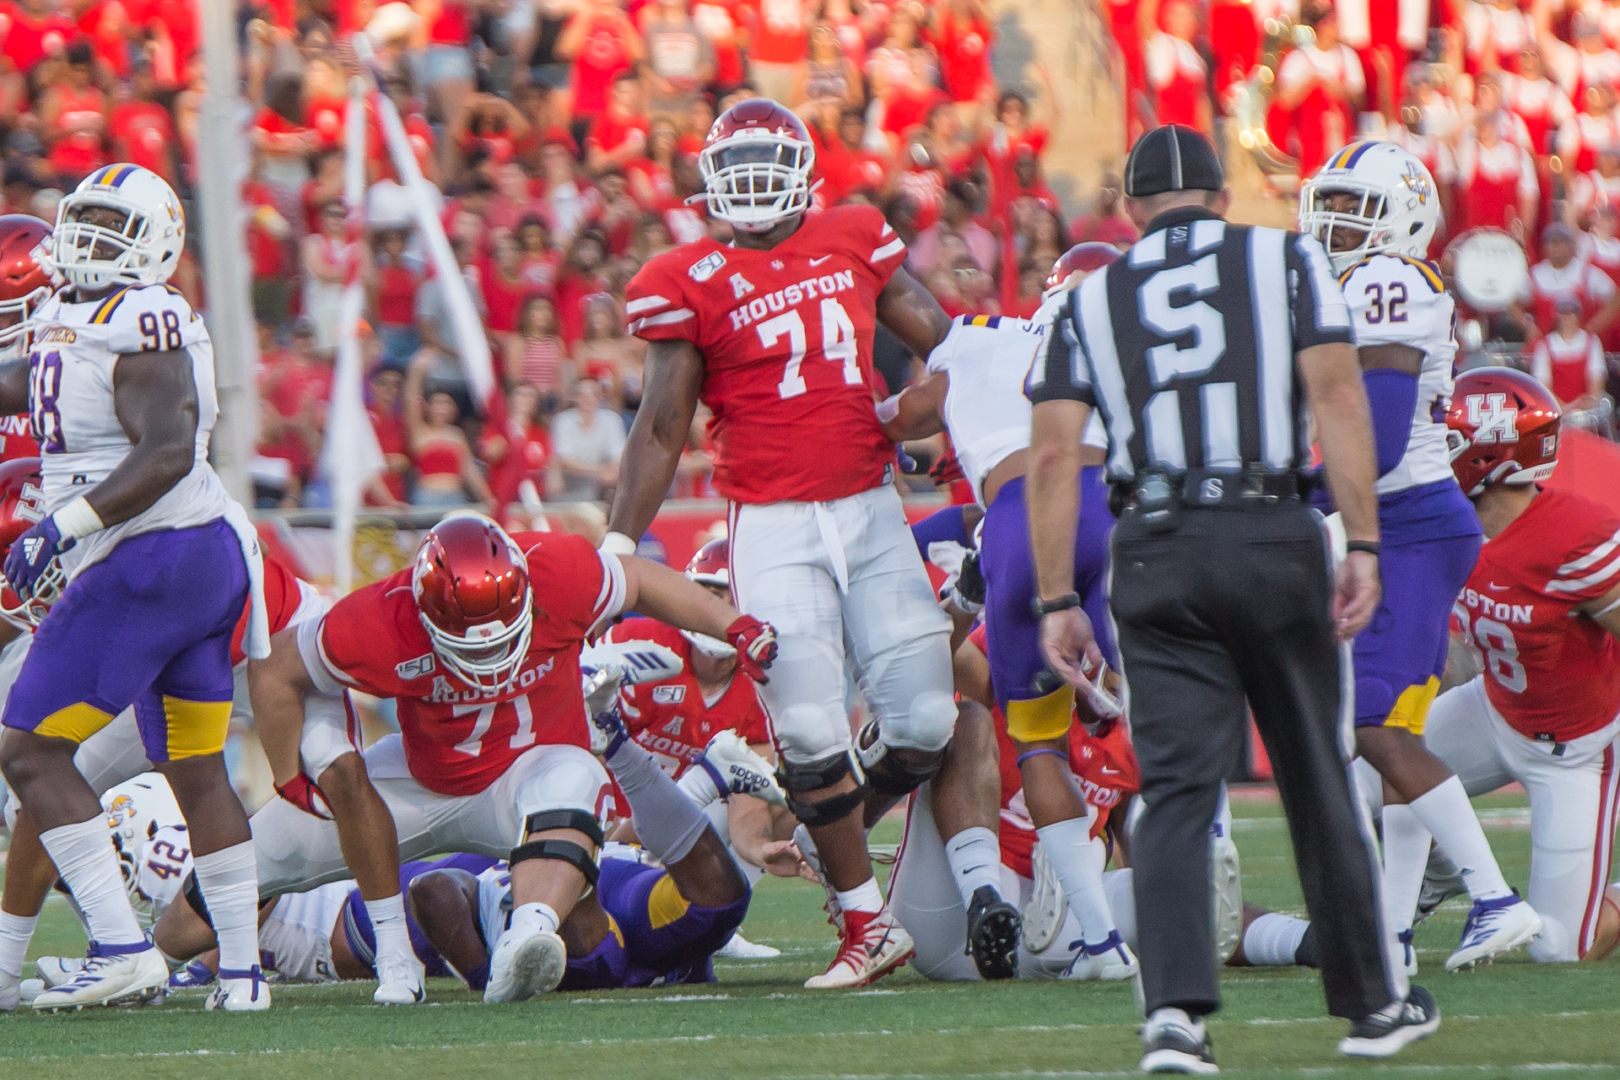 Senior tackle Josh Jones (74), the latest Houston invitee to the yearly Senior Bowl, has started the last 24 games for the Cougars, the longest streak on the team. | Trevor Nolley/The Cougar